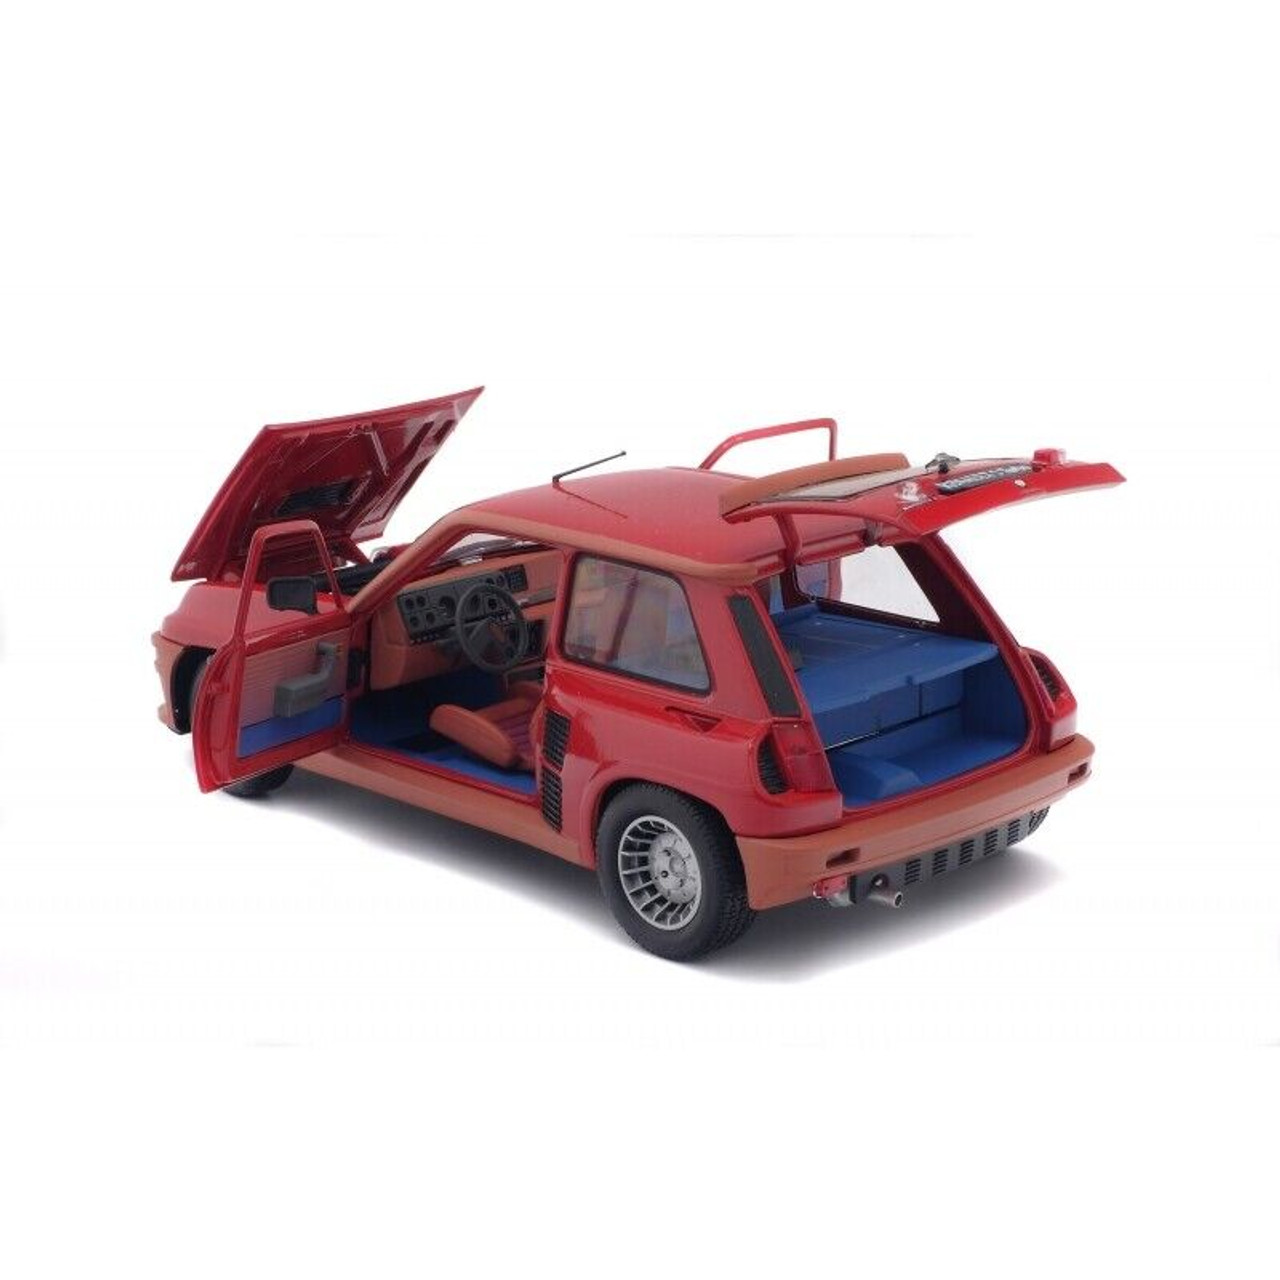 1/18 Solido 1981 Renault 5 Turbo Rouge Grenade (Red) Diecast Car Model